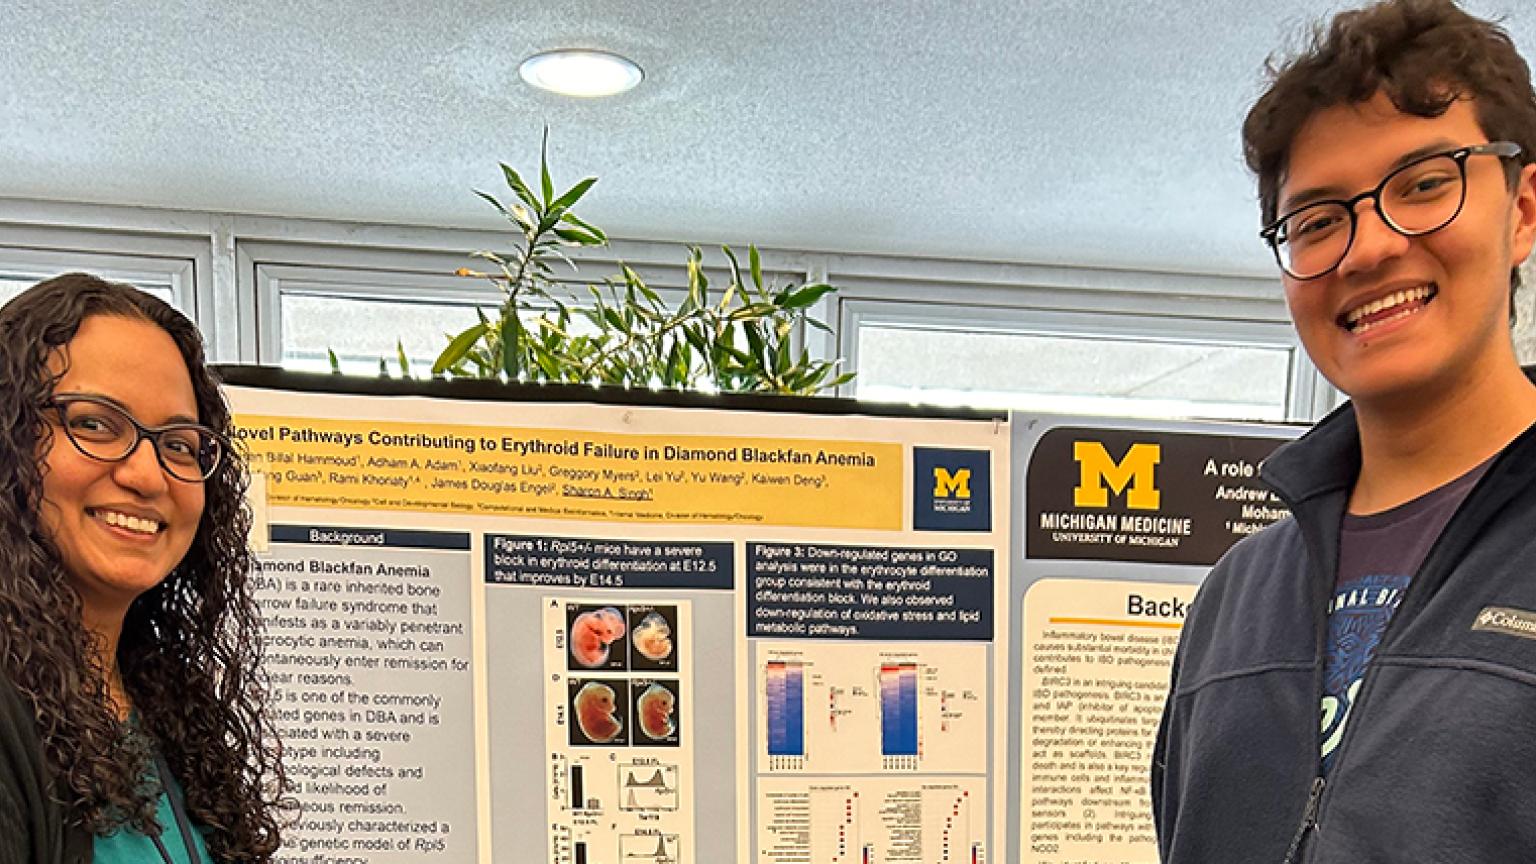 Researcher posing with presentation poster.